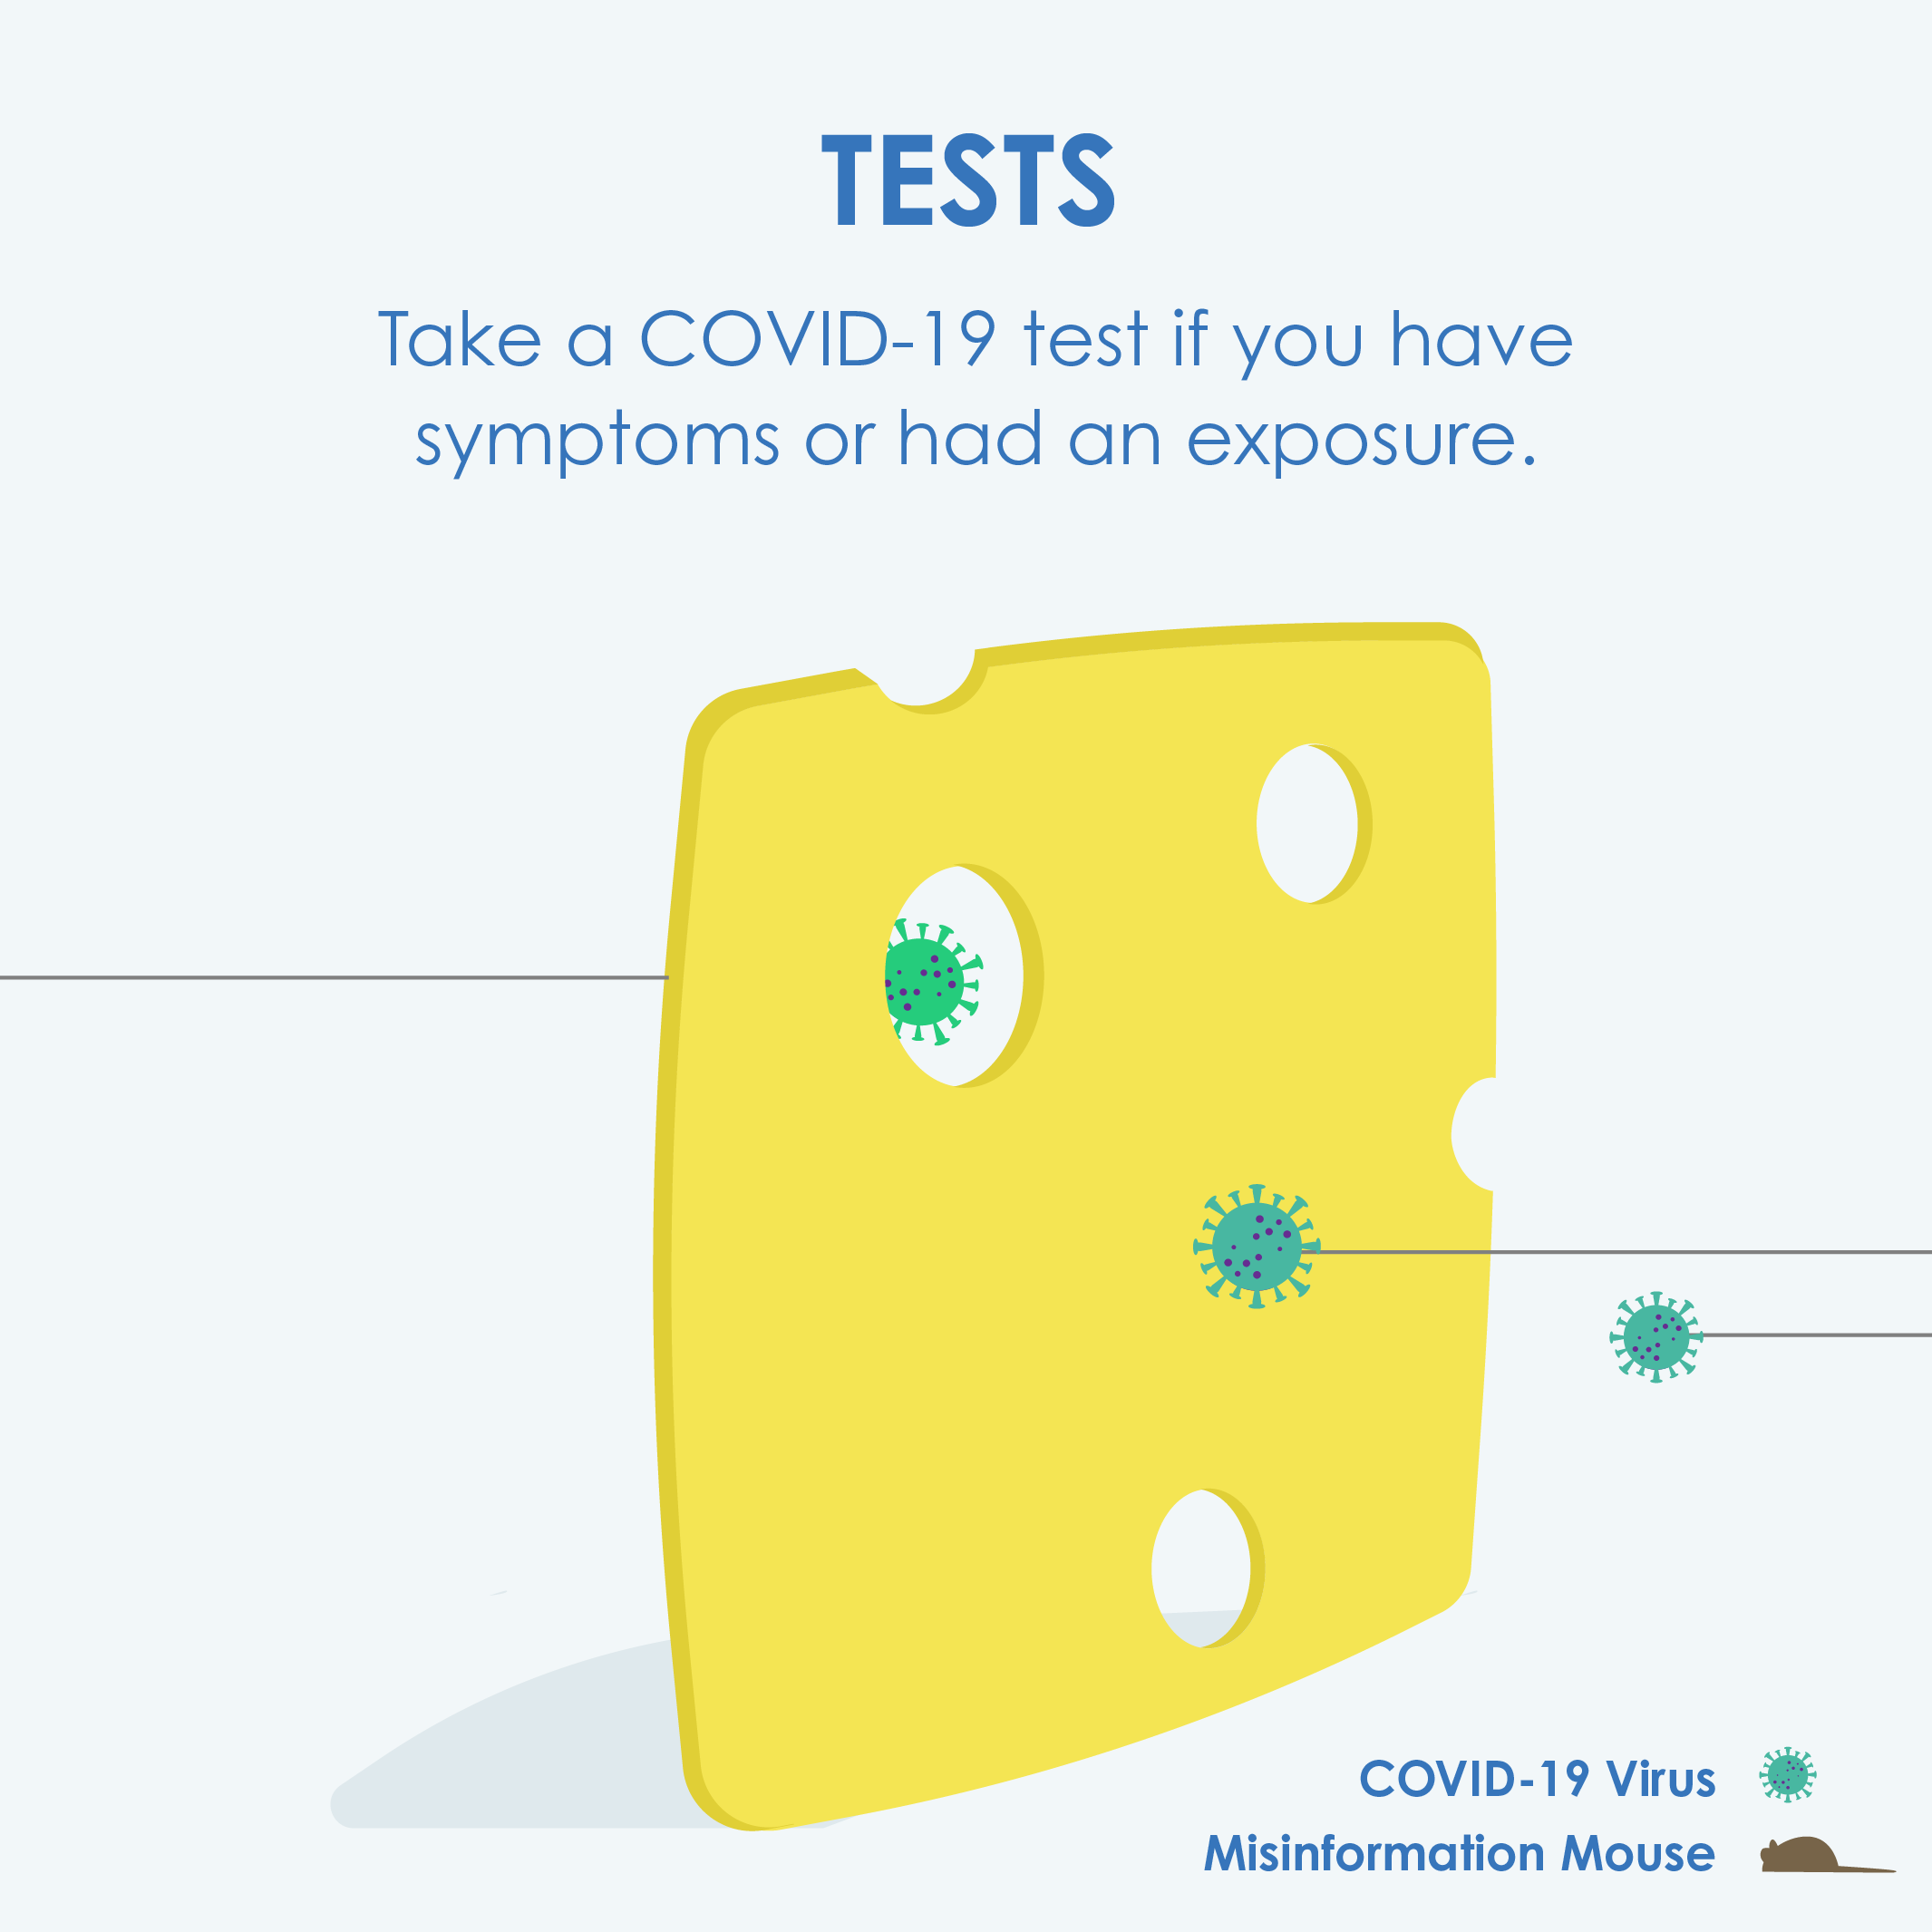 Tests. Take a COVID-19 test if you have symptoms or had an exposure.